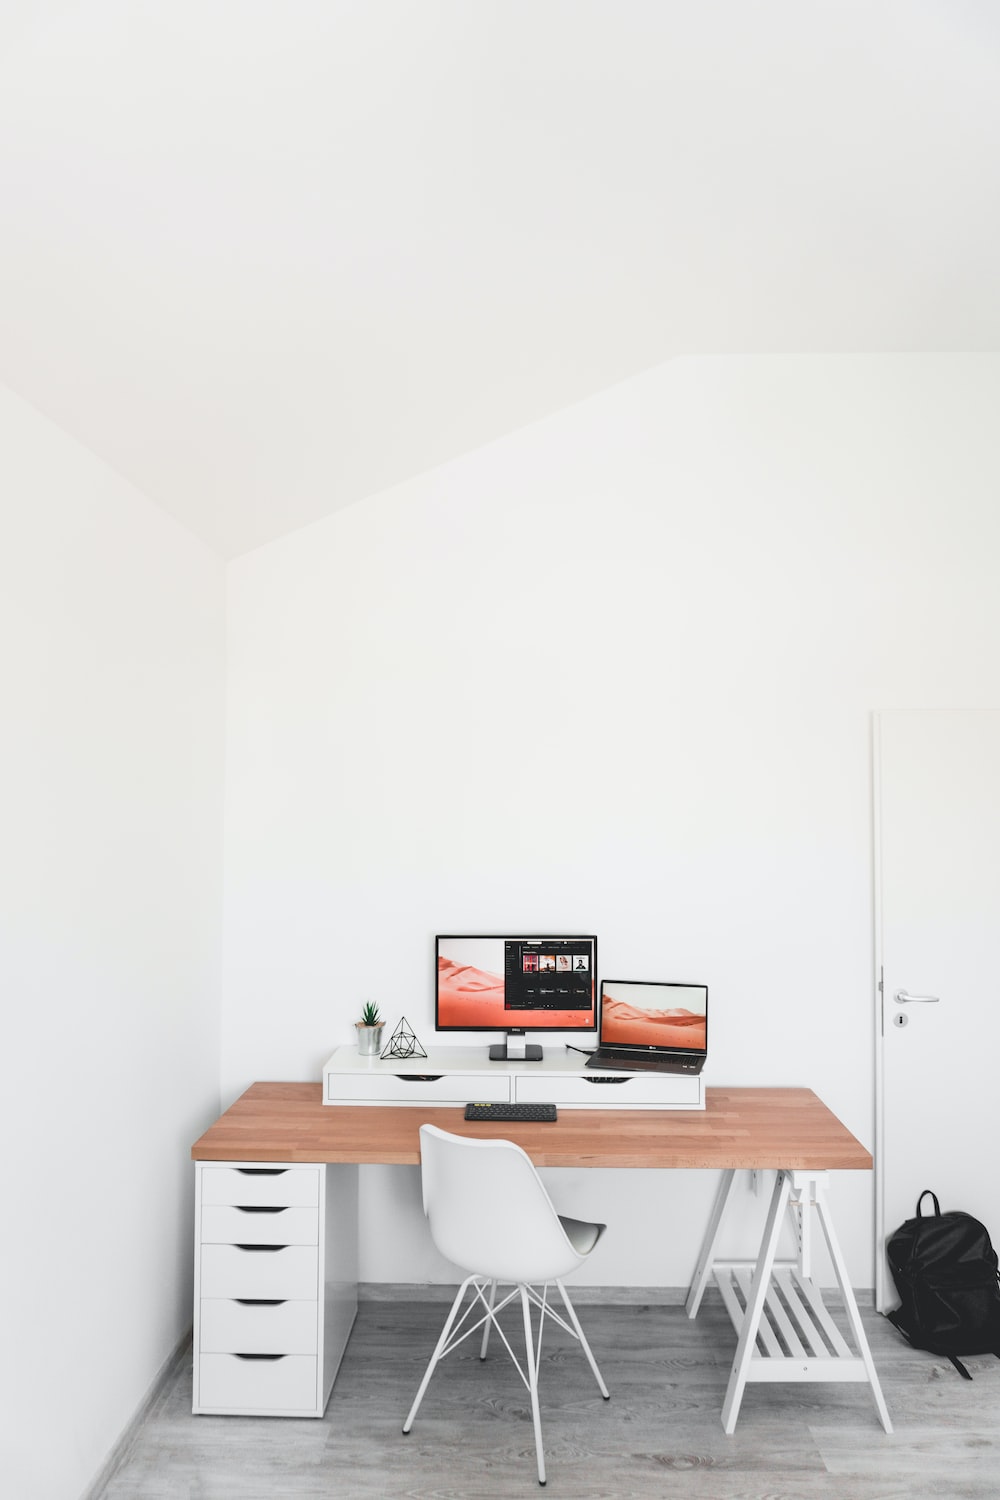 Where should a desk be placed in a home office?